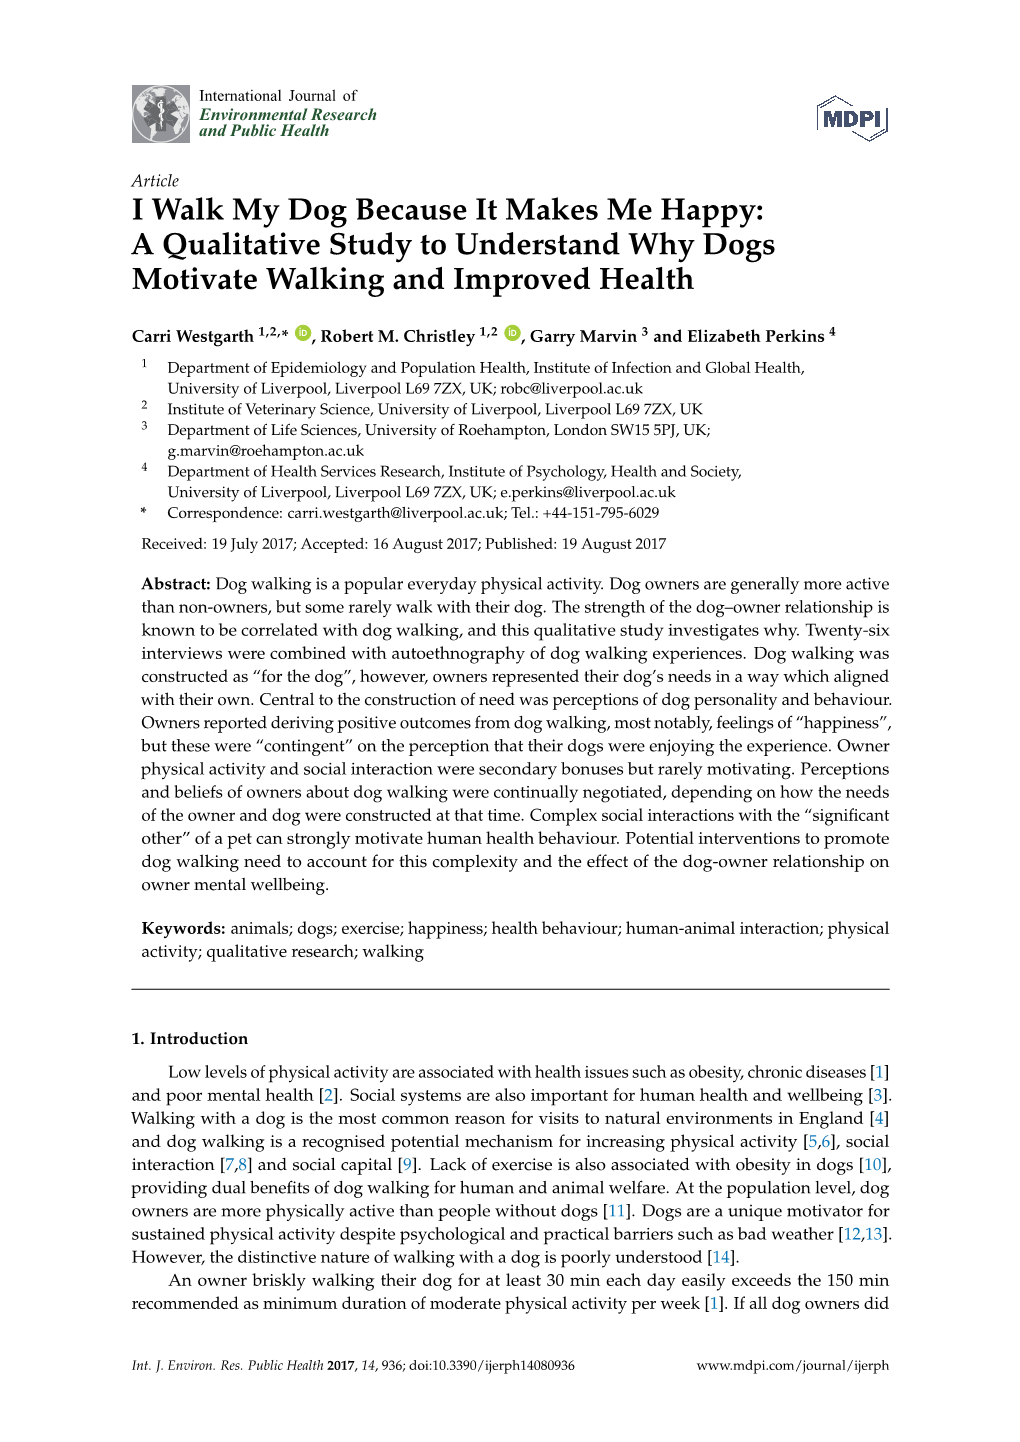 A Qualitative Study to Understand Why Dogs Motivate Walking and Improved Health